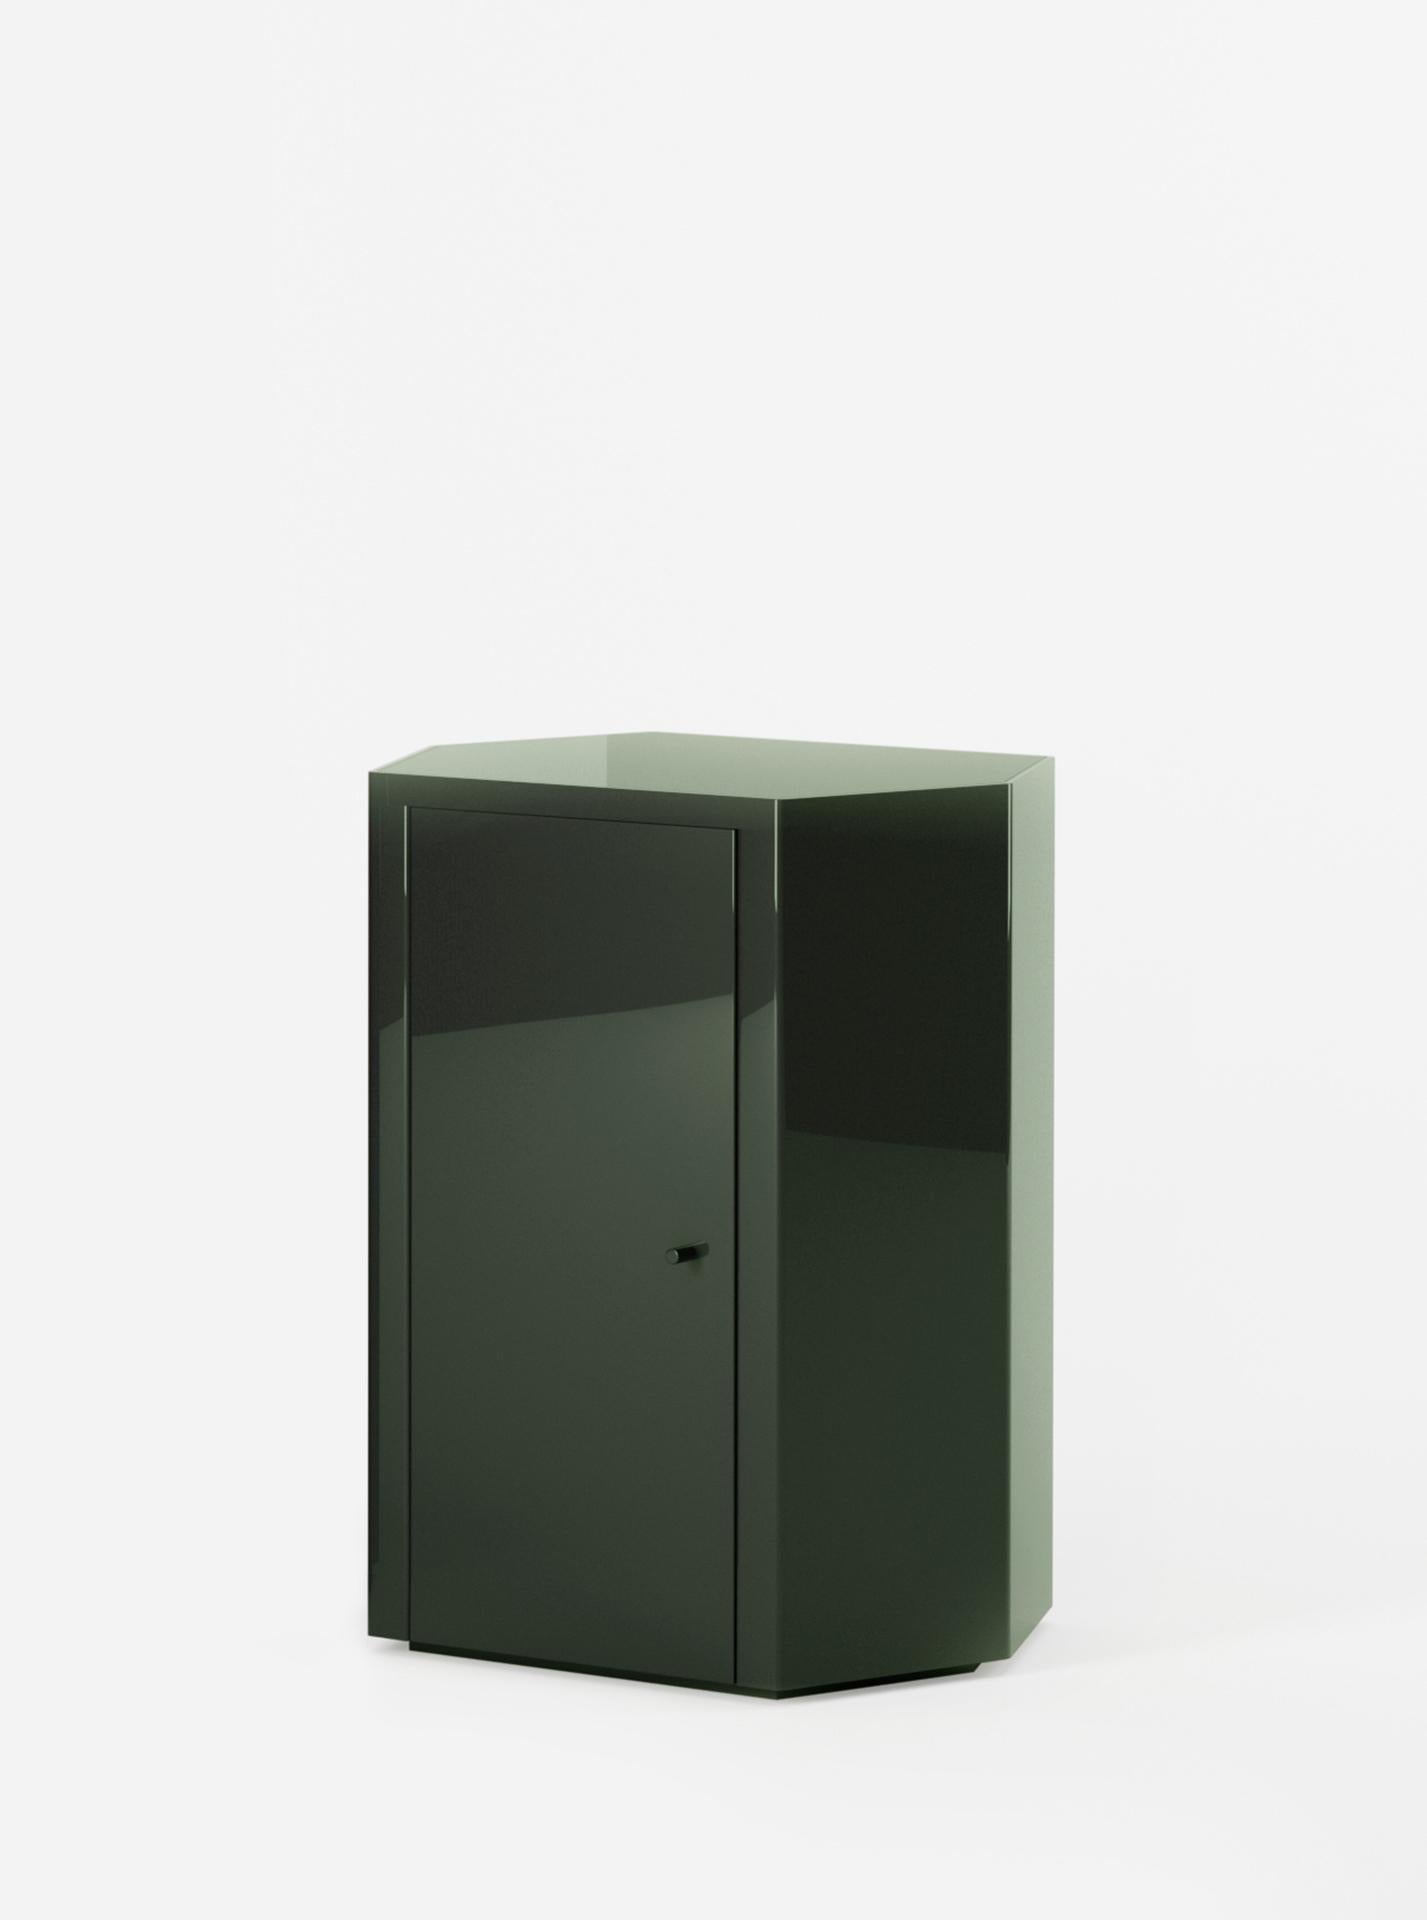 South African Pair of Park Night Stands in Forest Green Lacquer by Yaniv Chen for Lemon For Sale